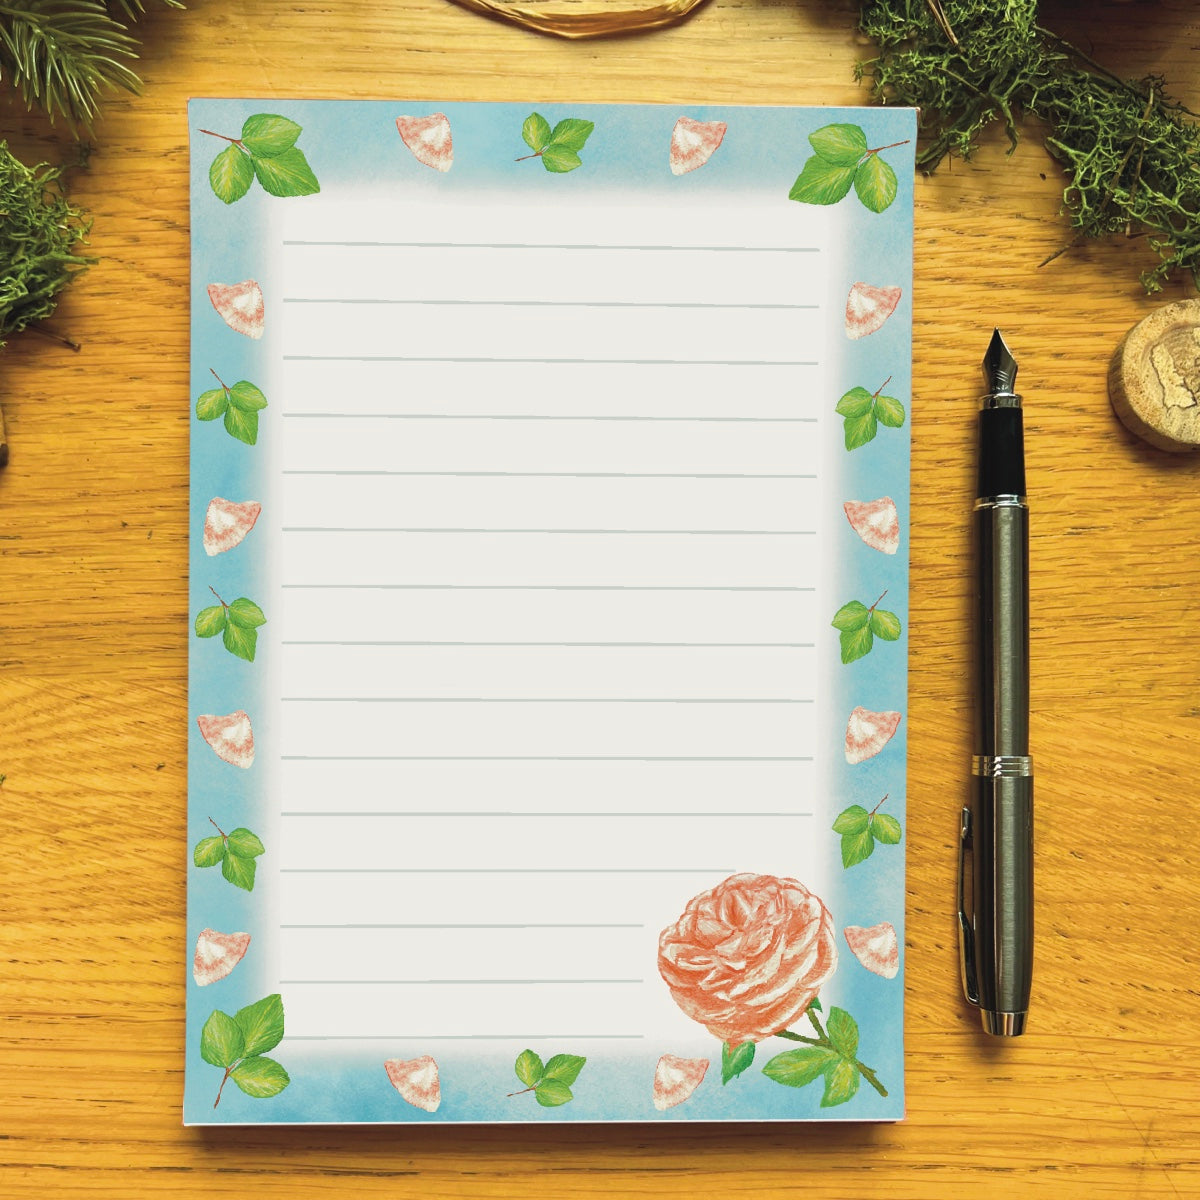 Peach rose illustrated notepad with sky blue border decorated with peach petals and leaves